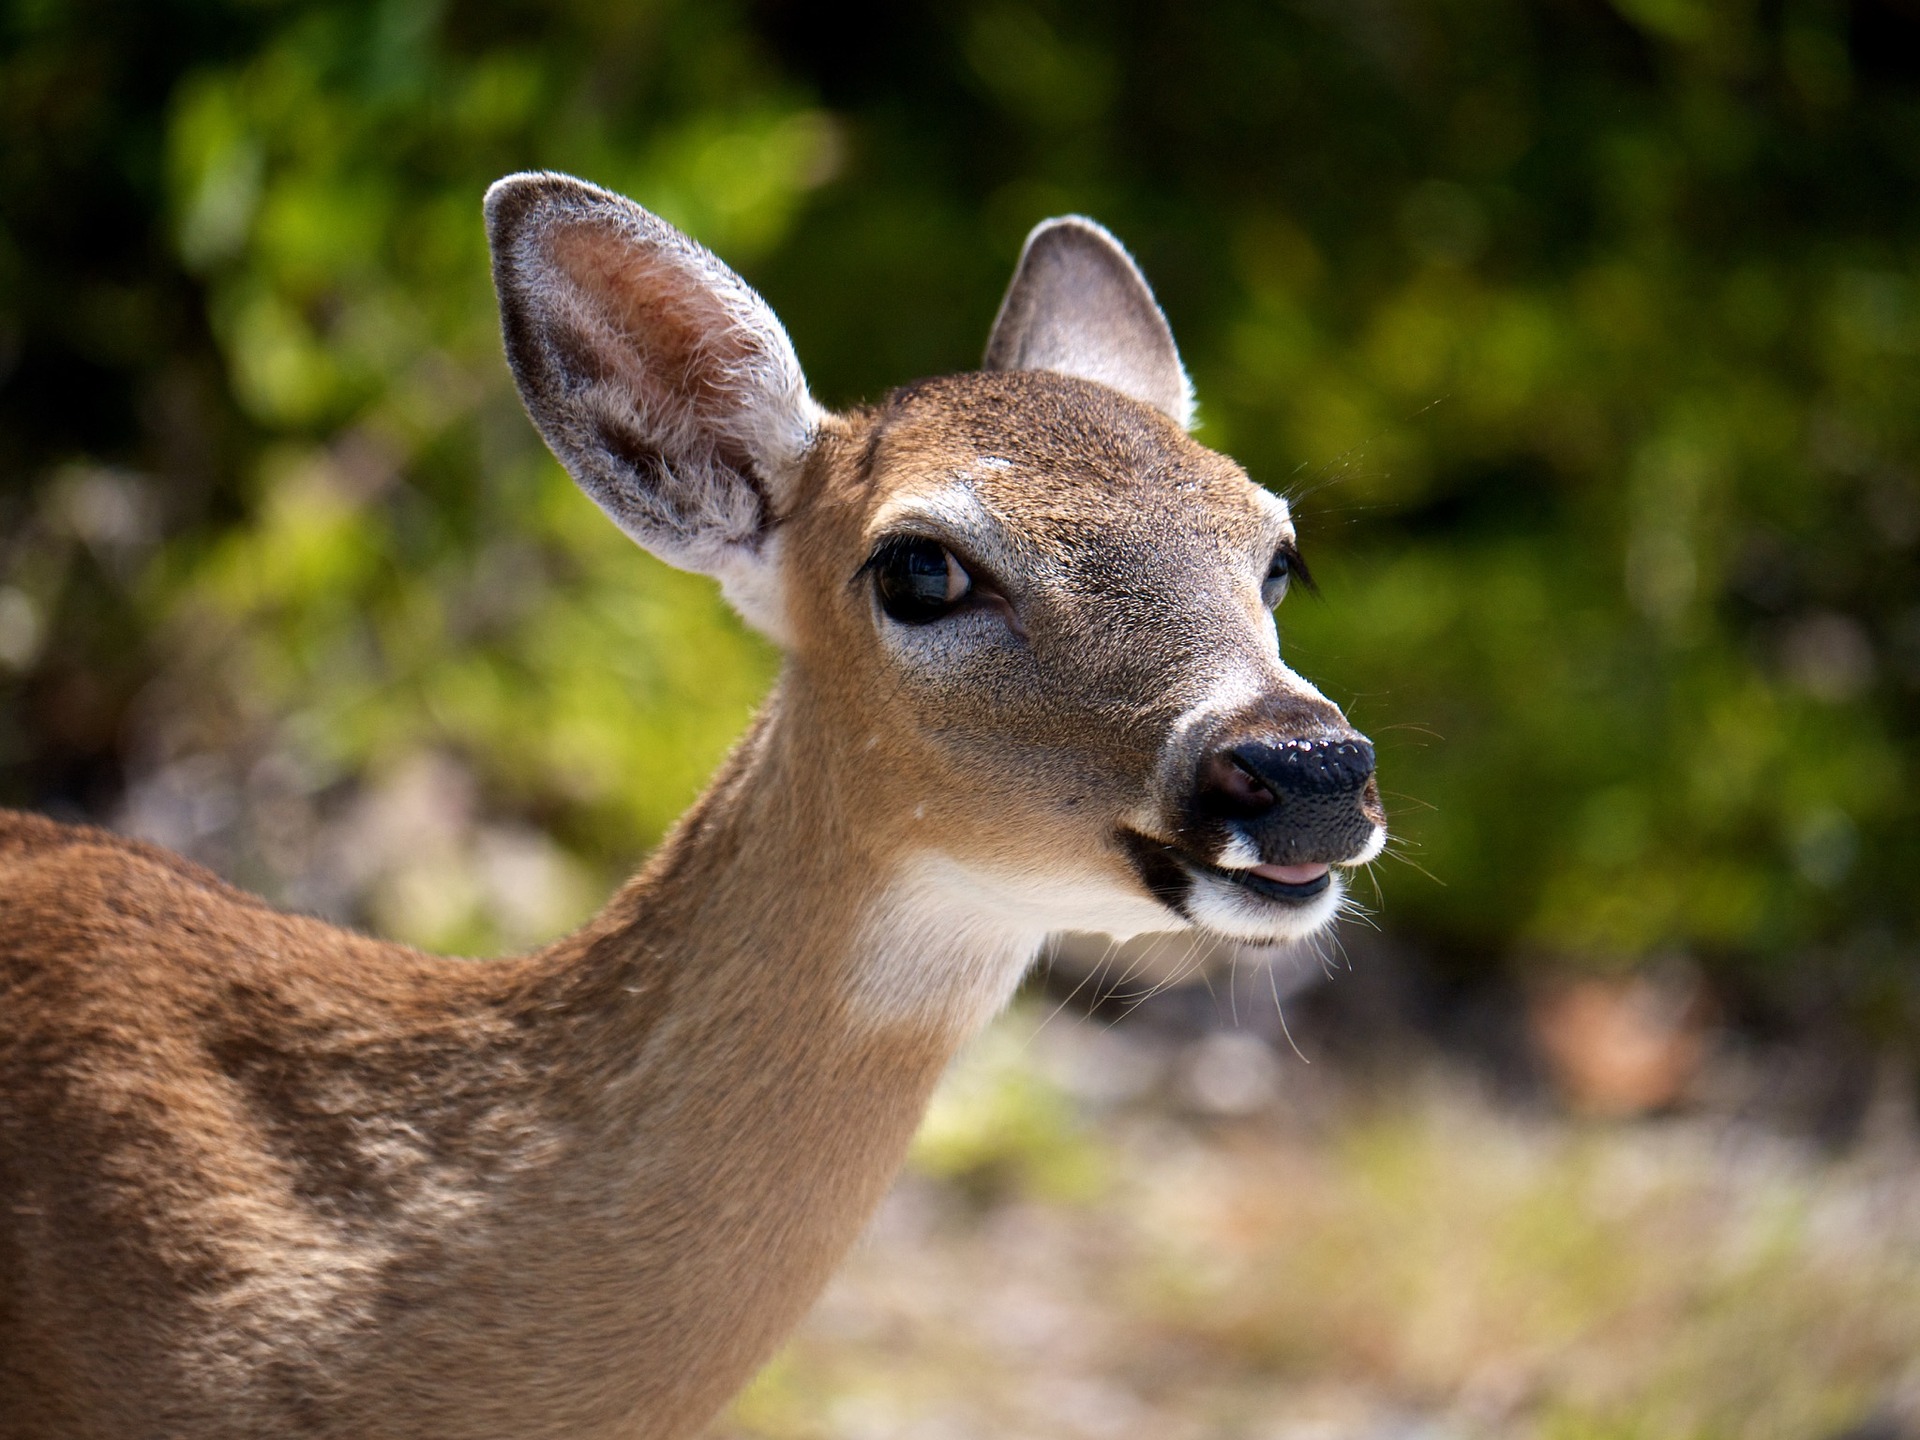 A fatal disease is spreading among U.S. deer, but there may be a new way to detect it